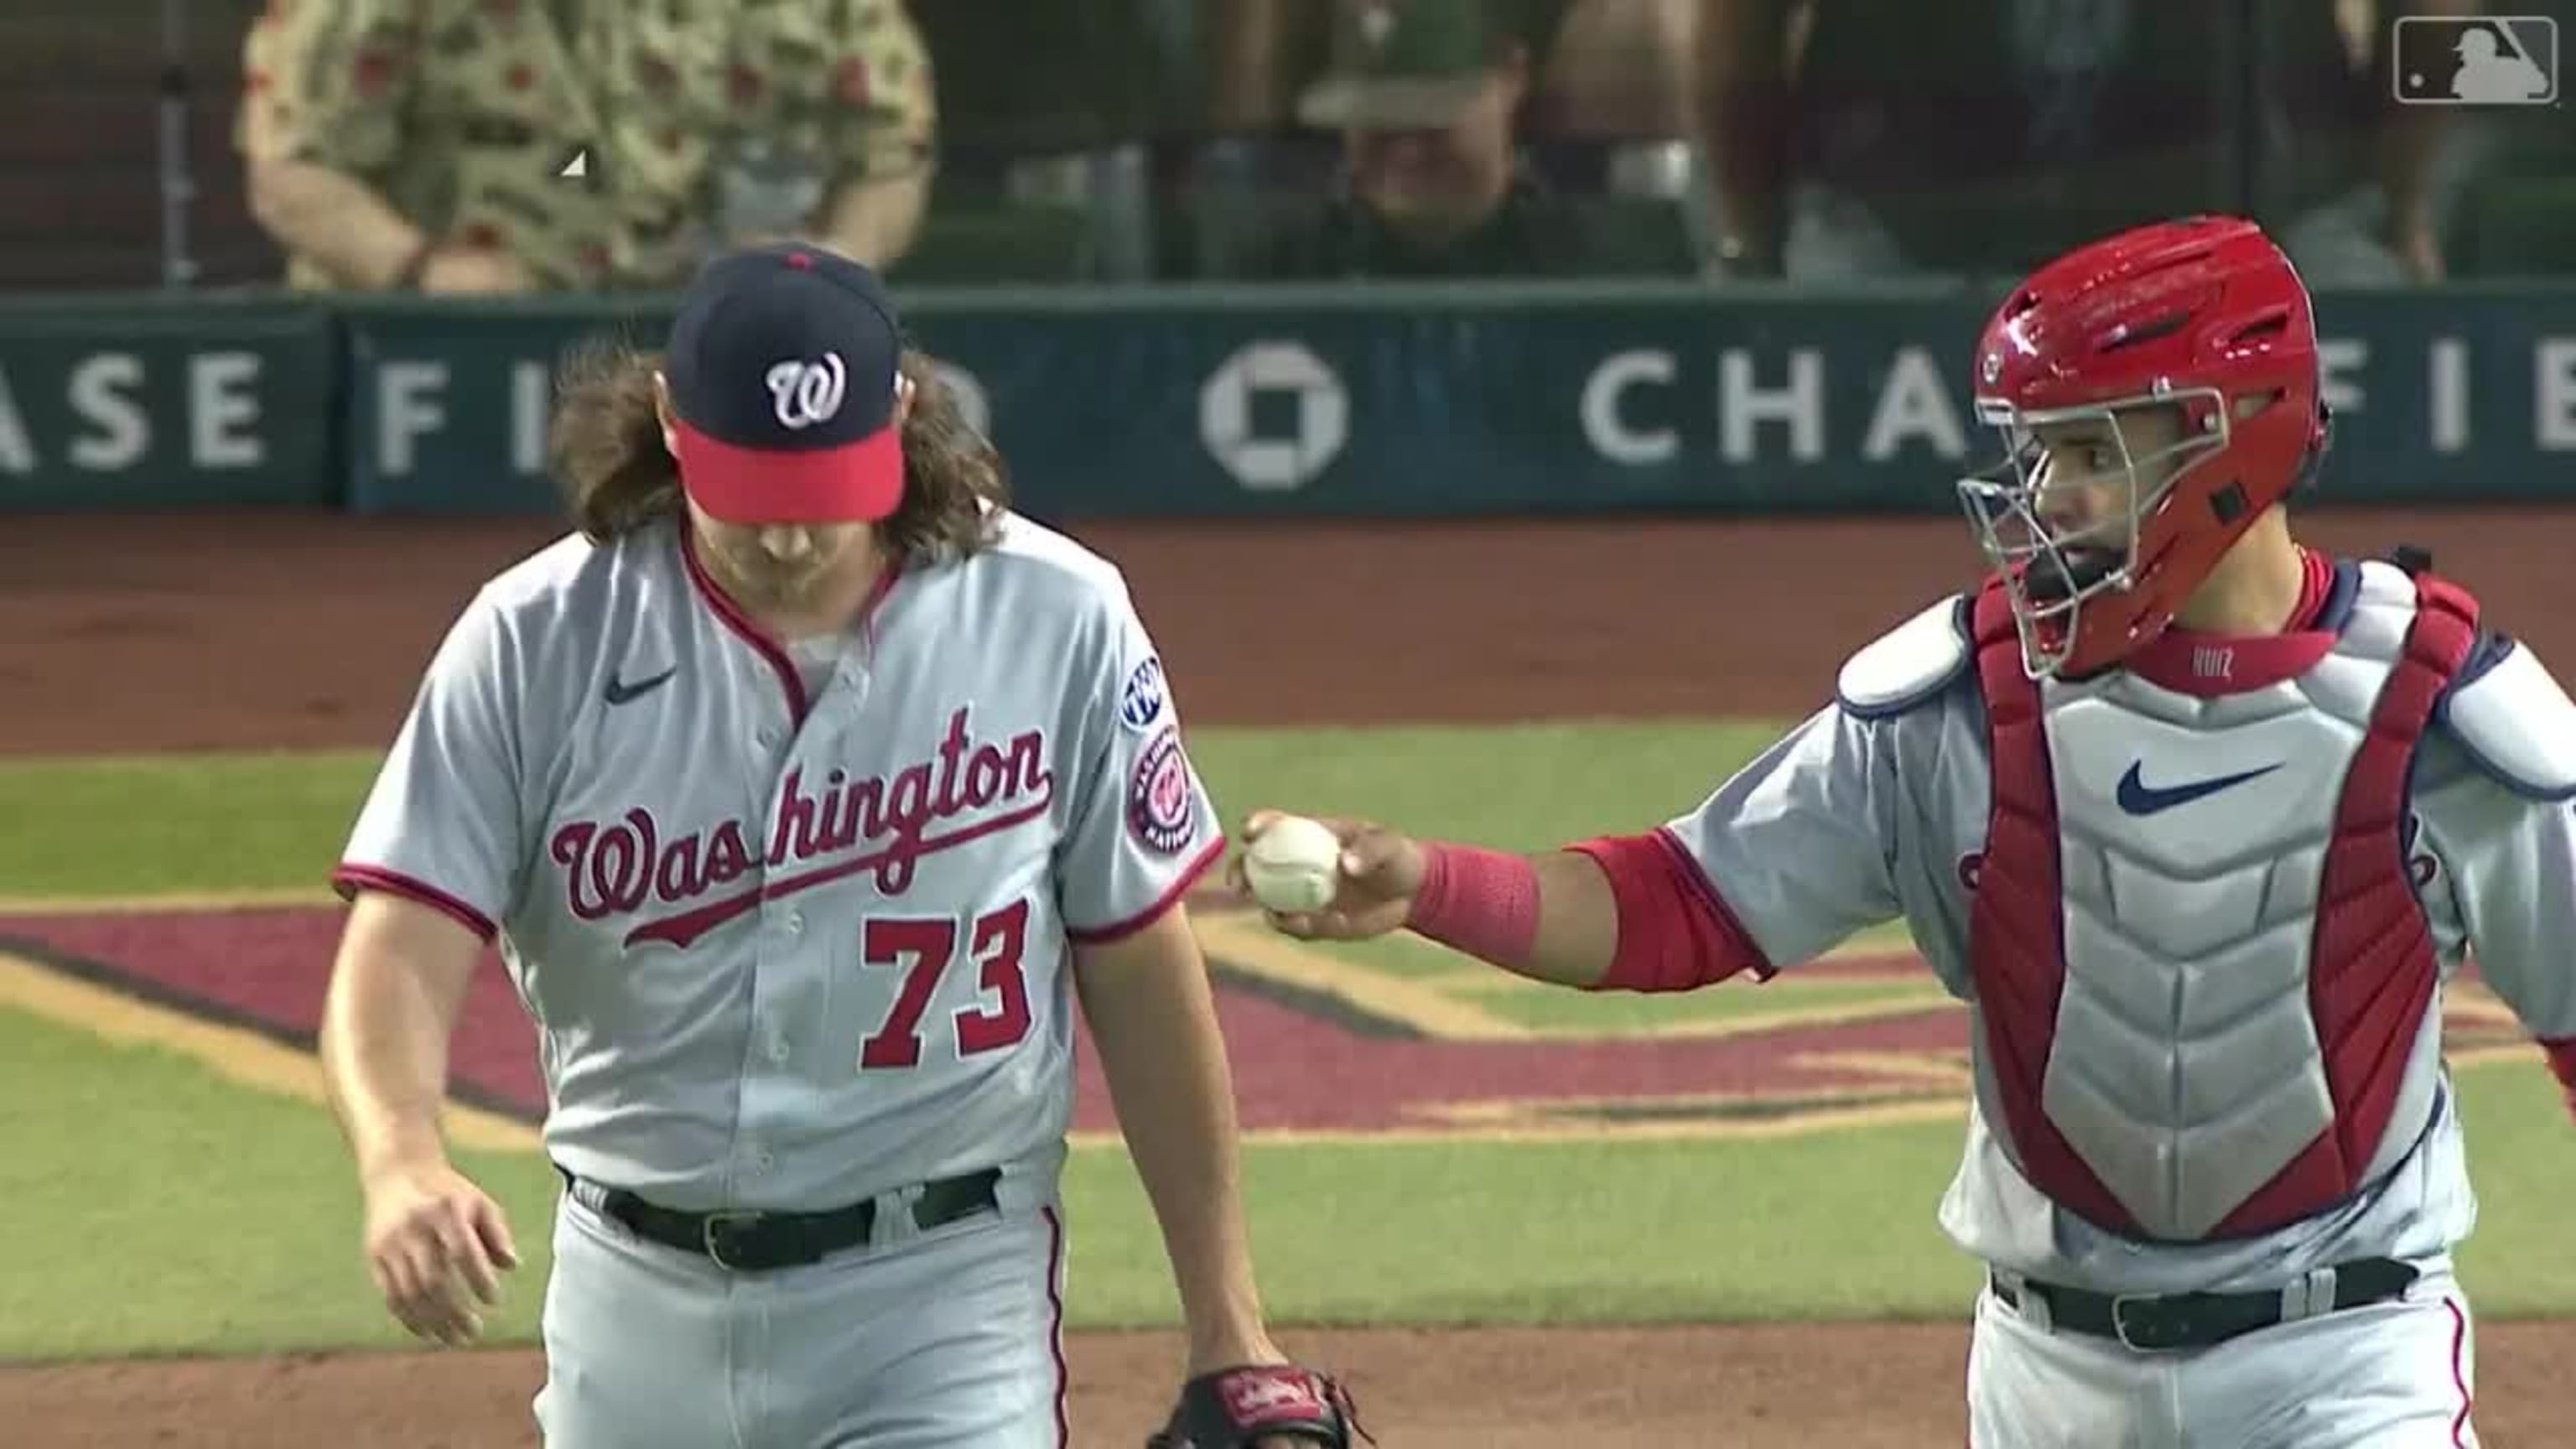 30-year-old Nationals rookie Joey Meneses hits HR in MLB debut